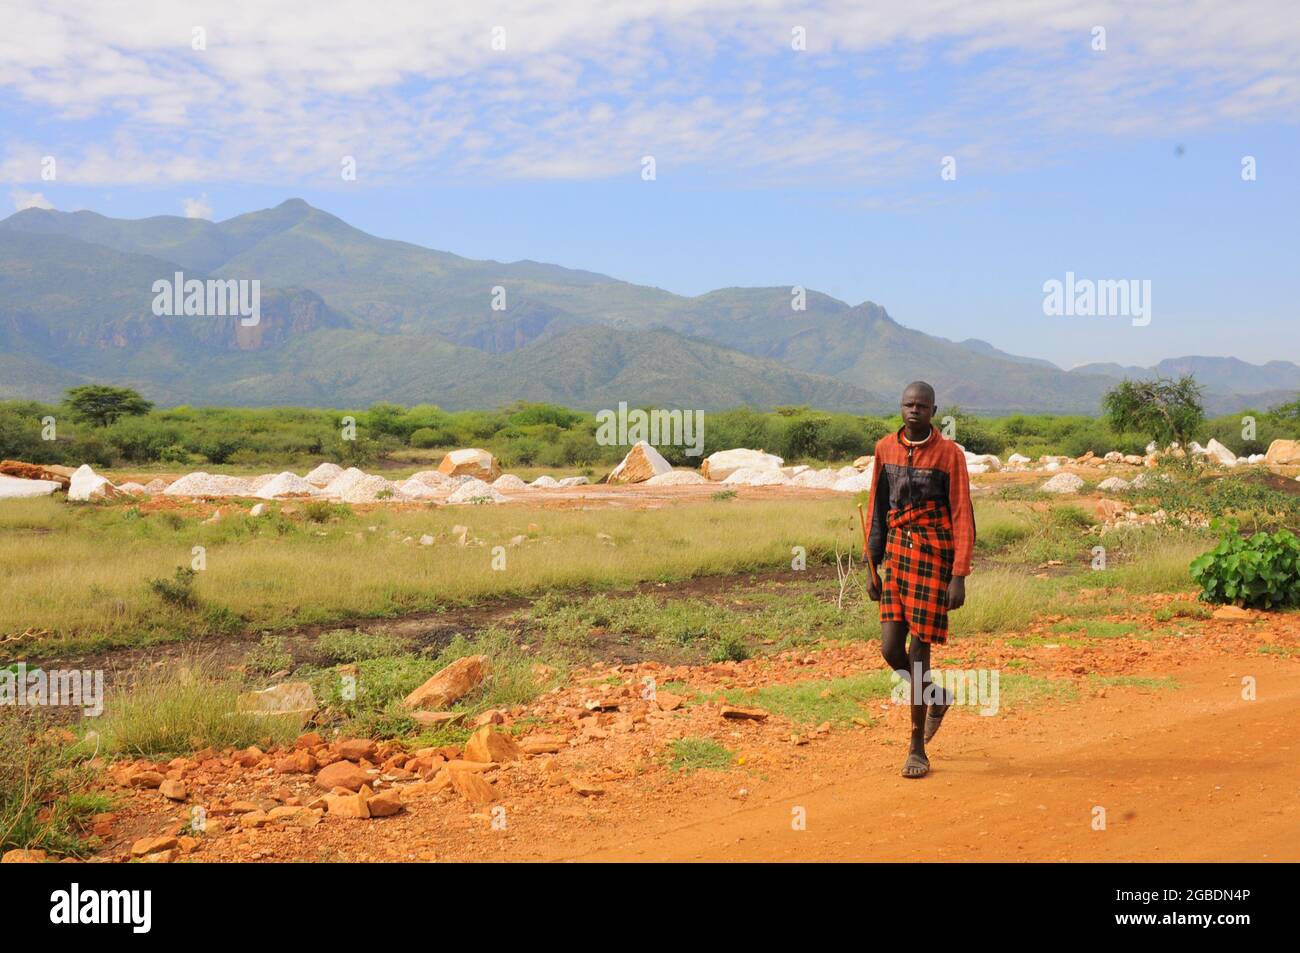 Development taking place in Karamoja region of Uganda at Moroto district. In the background is one of the beautiful scenery’s in the region. The people in this are pastoralist they rely on animals as their main source of living. Uganda. Stock Photo